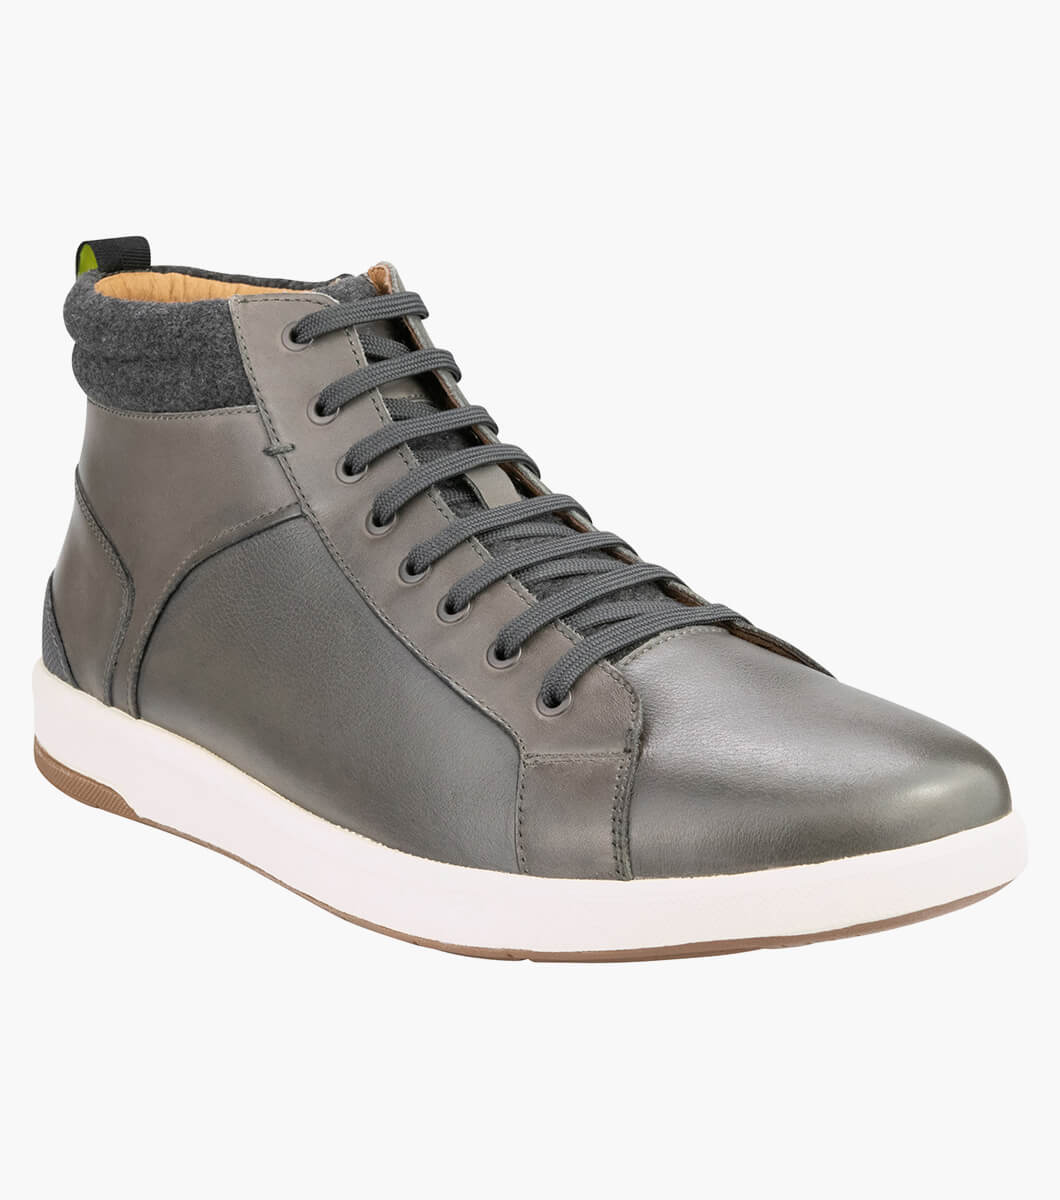 Crossover Boot Lace To Toe Boot Men's Sneakers | Florsheim.com